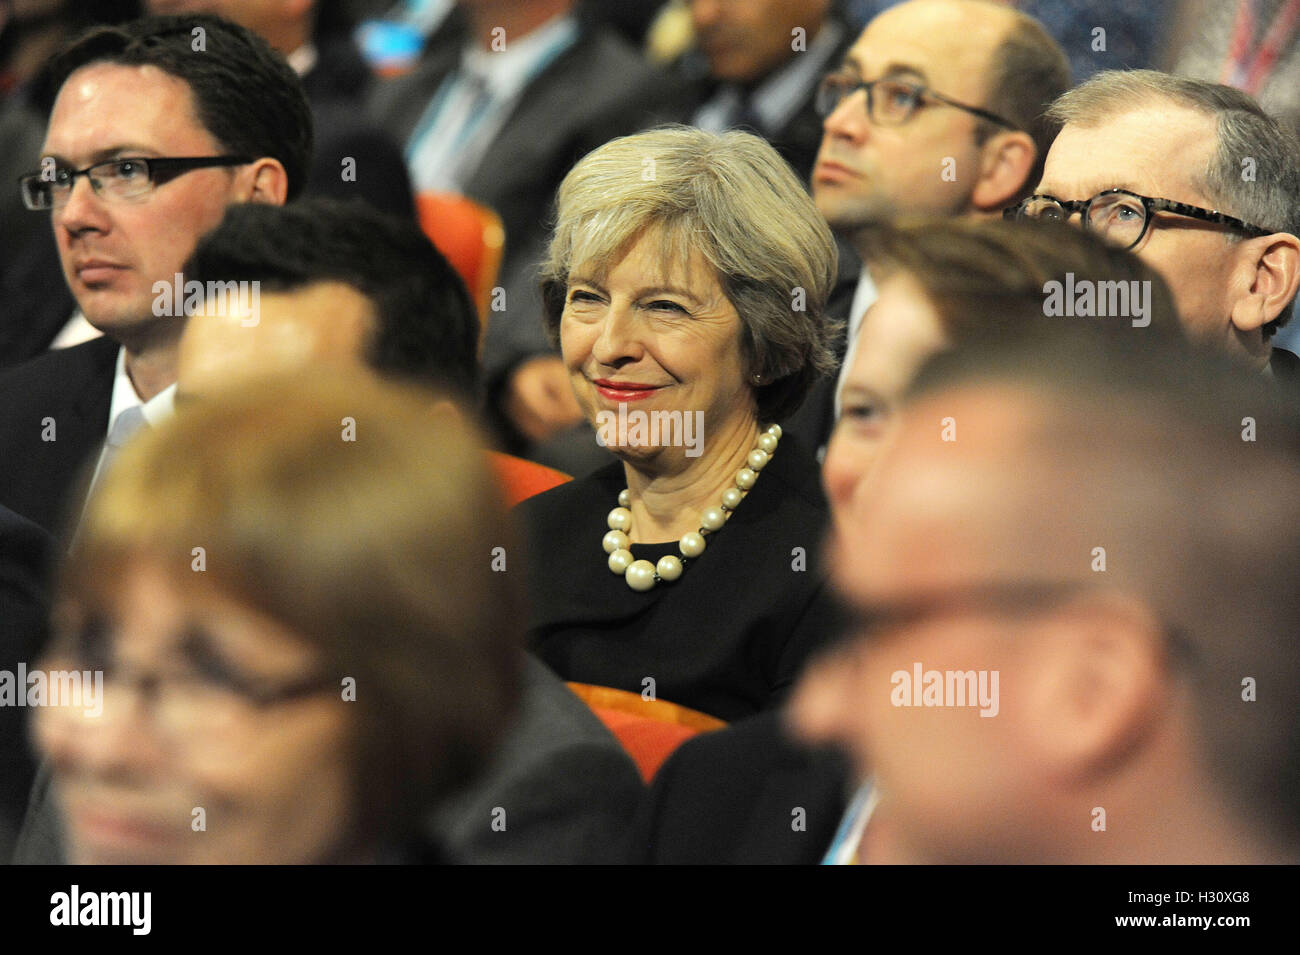 Birmingham, England. 2nd October, 2016.  Theresa May, Prime Minister and Leader of the Conservative Party listening to a speech on the first day of the Conservative Party Conference at the ICC Birmingham. The theme of the speech was 'Global Britain: Making a Success of Brexit'. This conference follows the referendum decision for the UK to leave the European Union, and the subsequent election of Theresa May as  leader of the Conservative Party. Kevin Hayes/Alamy Live News Stock Photo